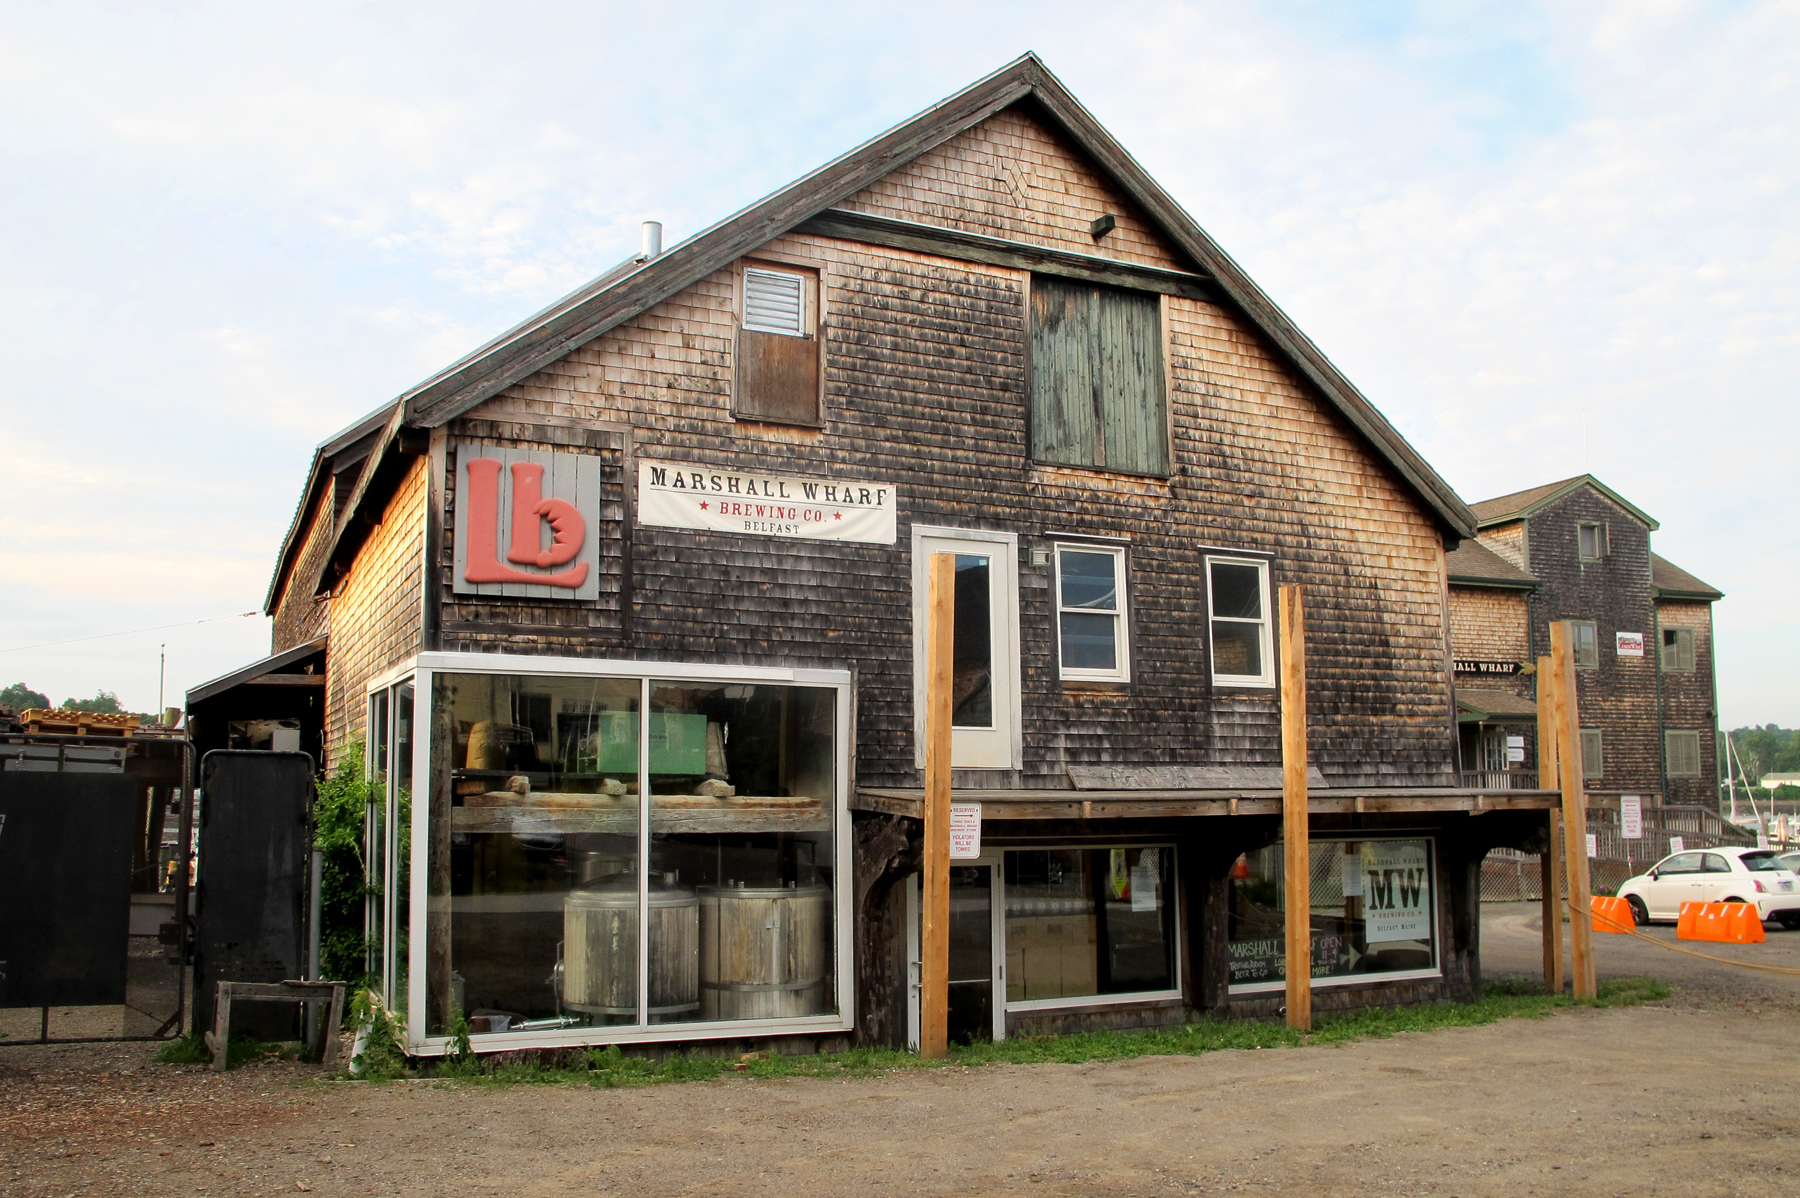 The Marshall Wharf Brewing Co. in Belfast, Maine. Photo: Jay Field/MPBN